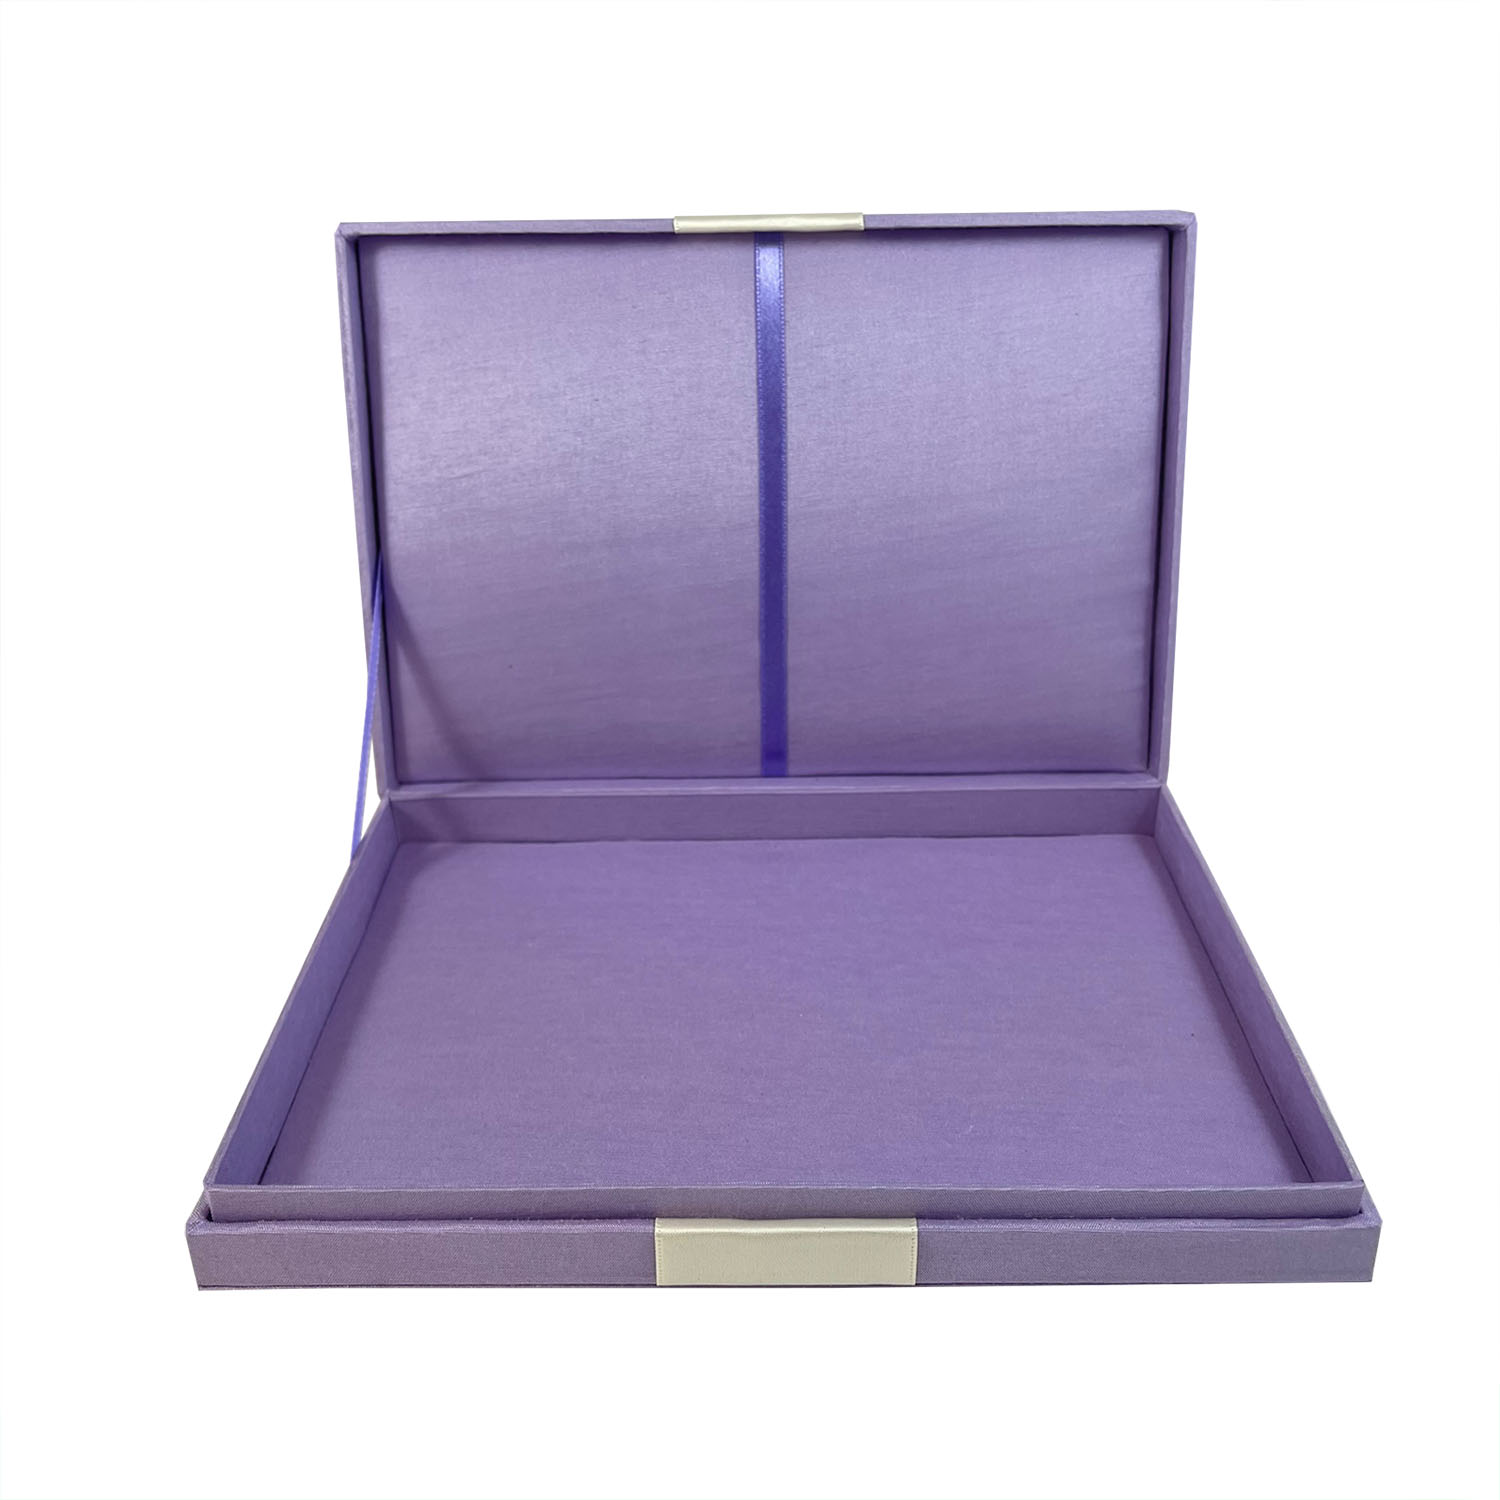 Inside look of padded silk box for invitation cards